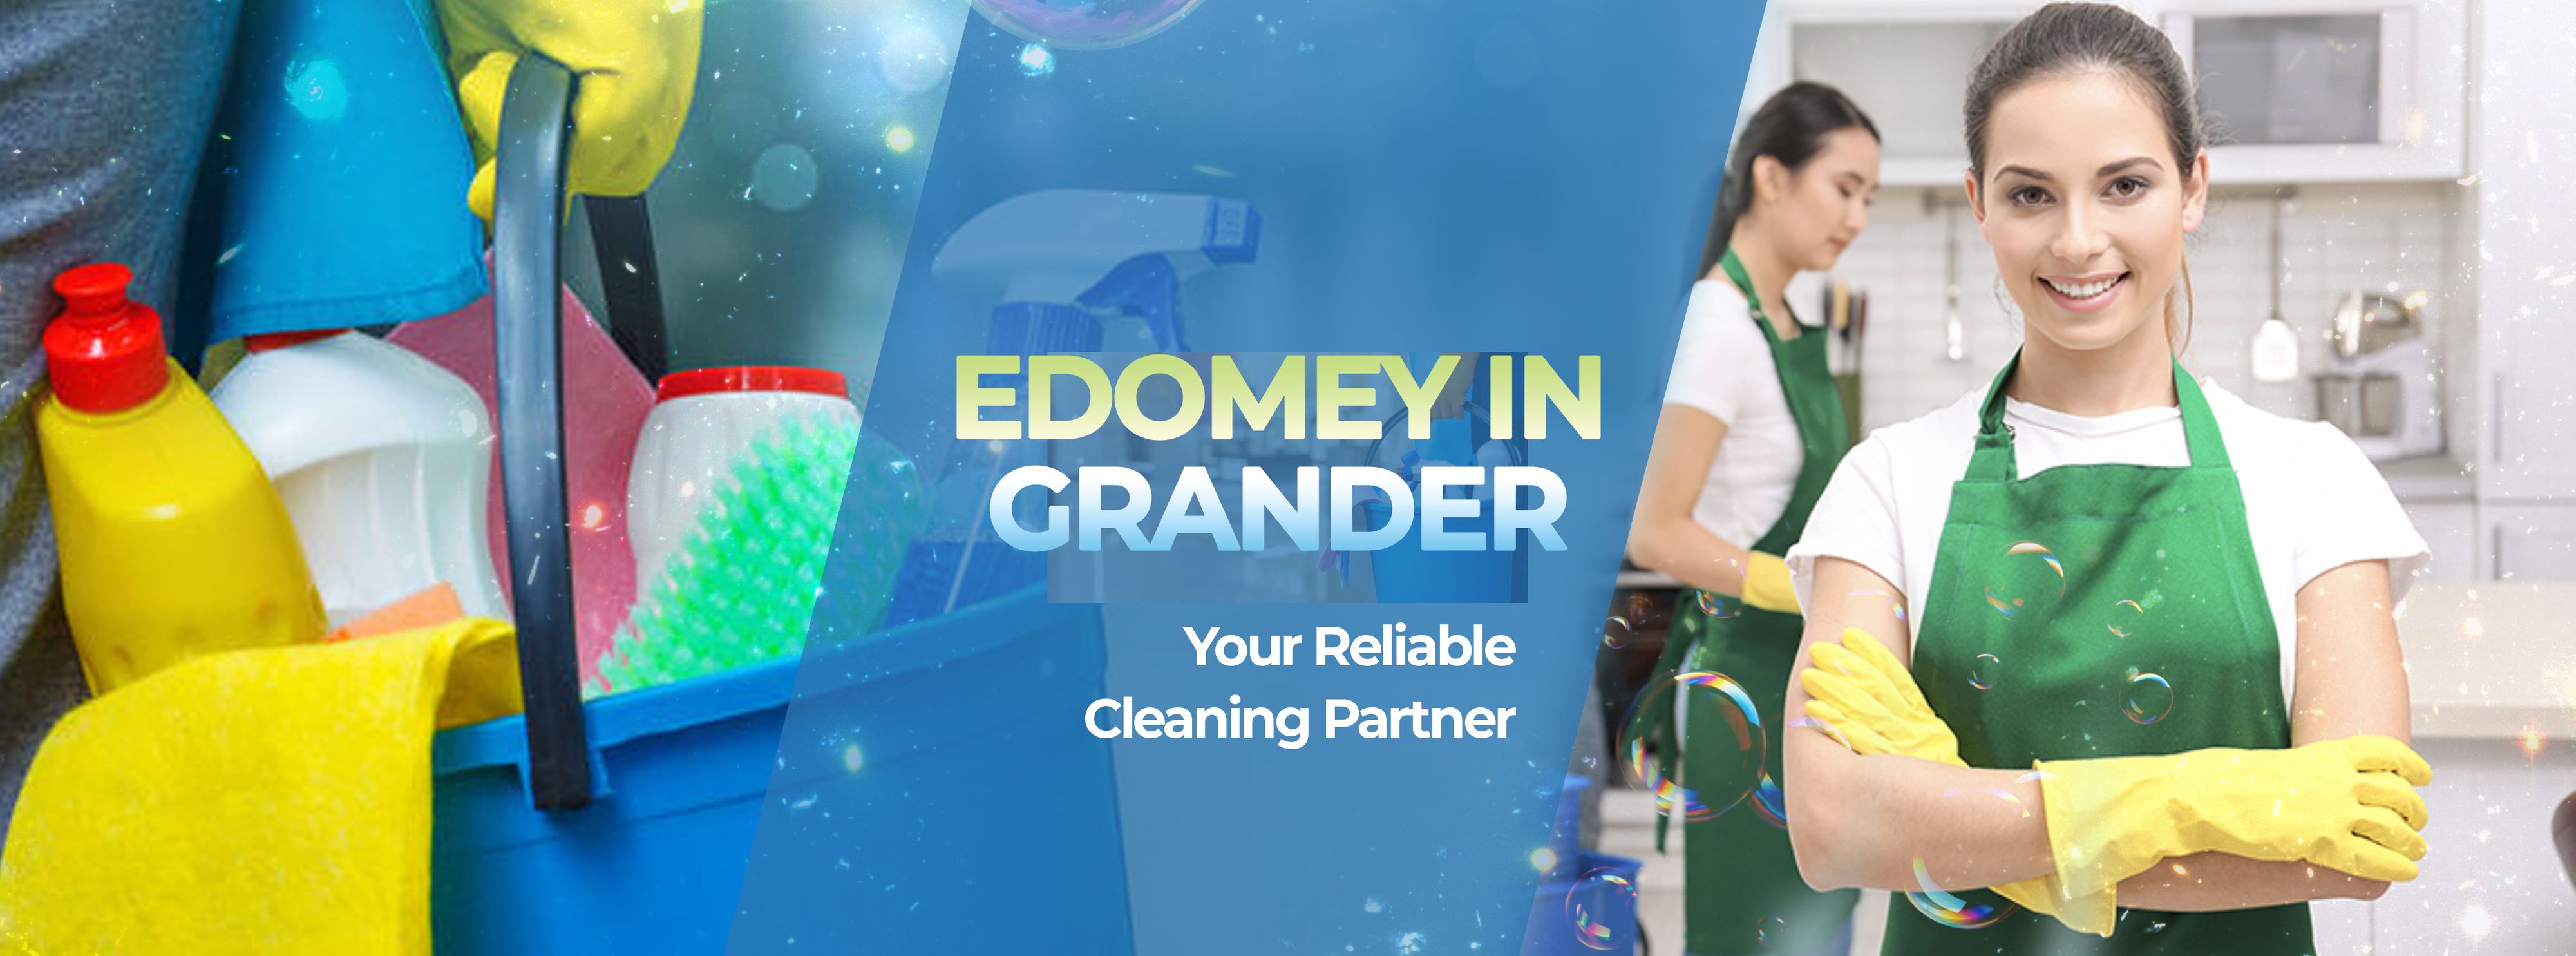 affordable Commercial Cleaning Services in Grander